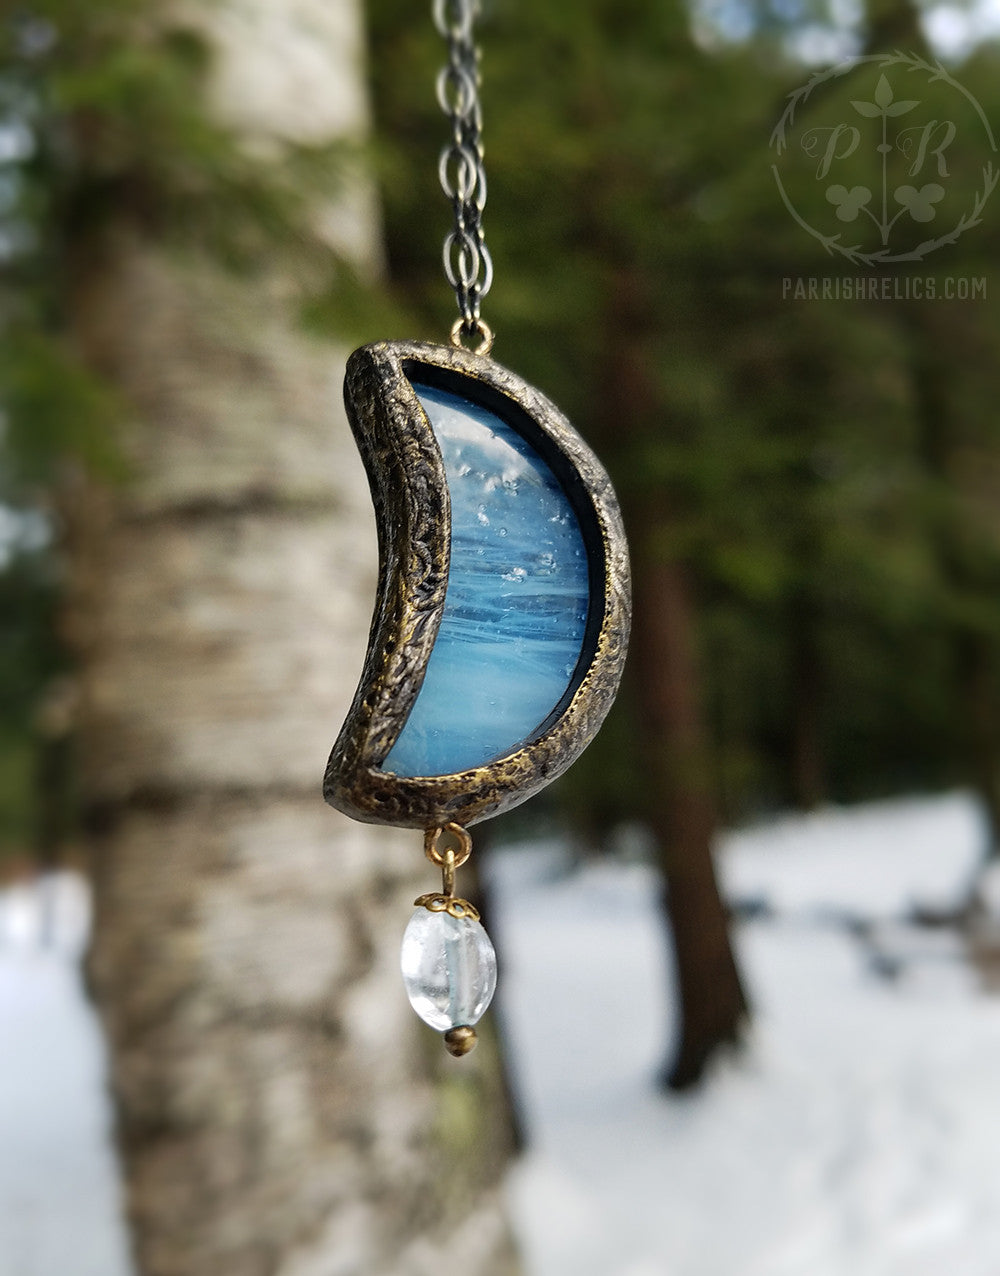 Galatea's Crescent Moon Stained Glass Amulet